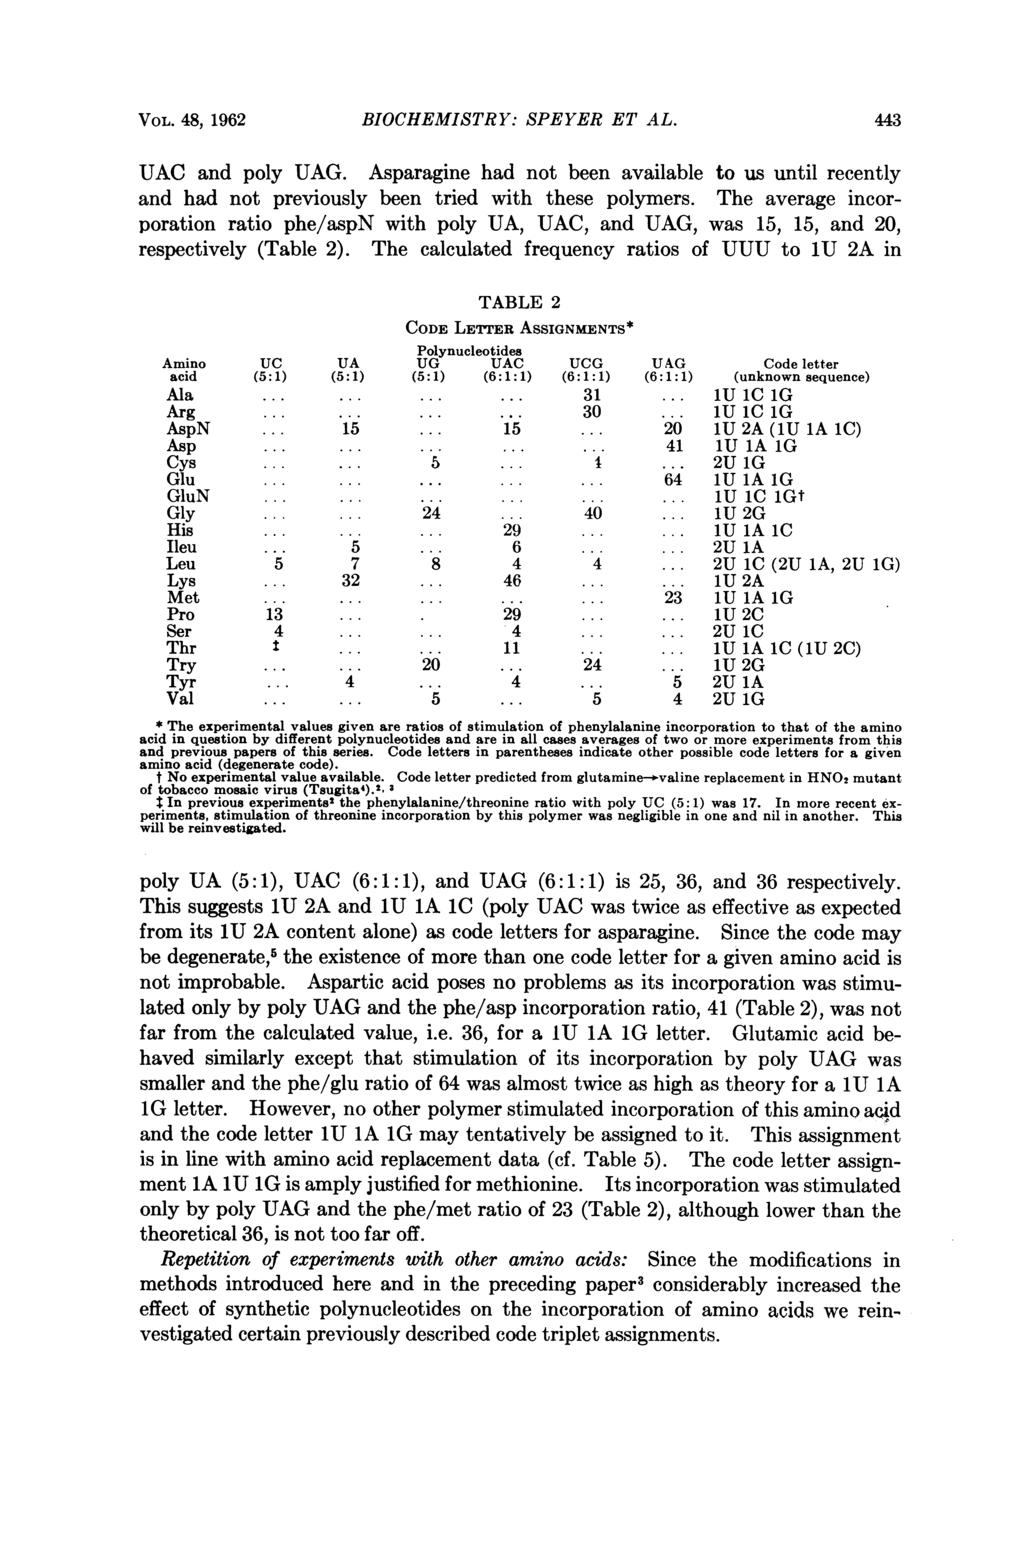 VOL. 48, 1962 BIOCHEMISTRY: SPEYER ET AL. 443 UAC and poly UAG. Asparagine had not been available to us until recently and had not previously been tried with these polymers.